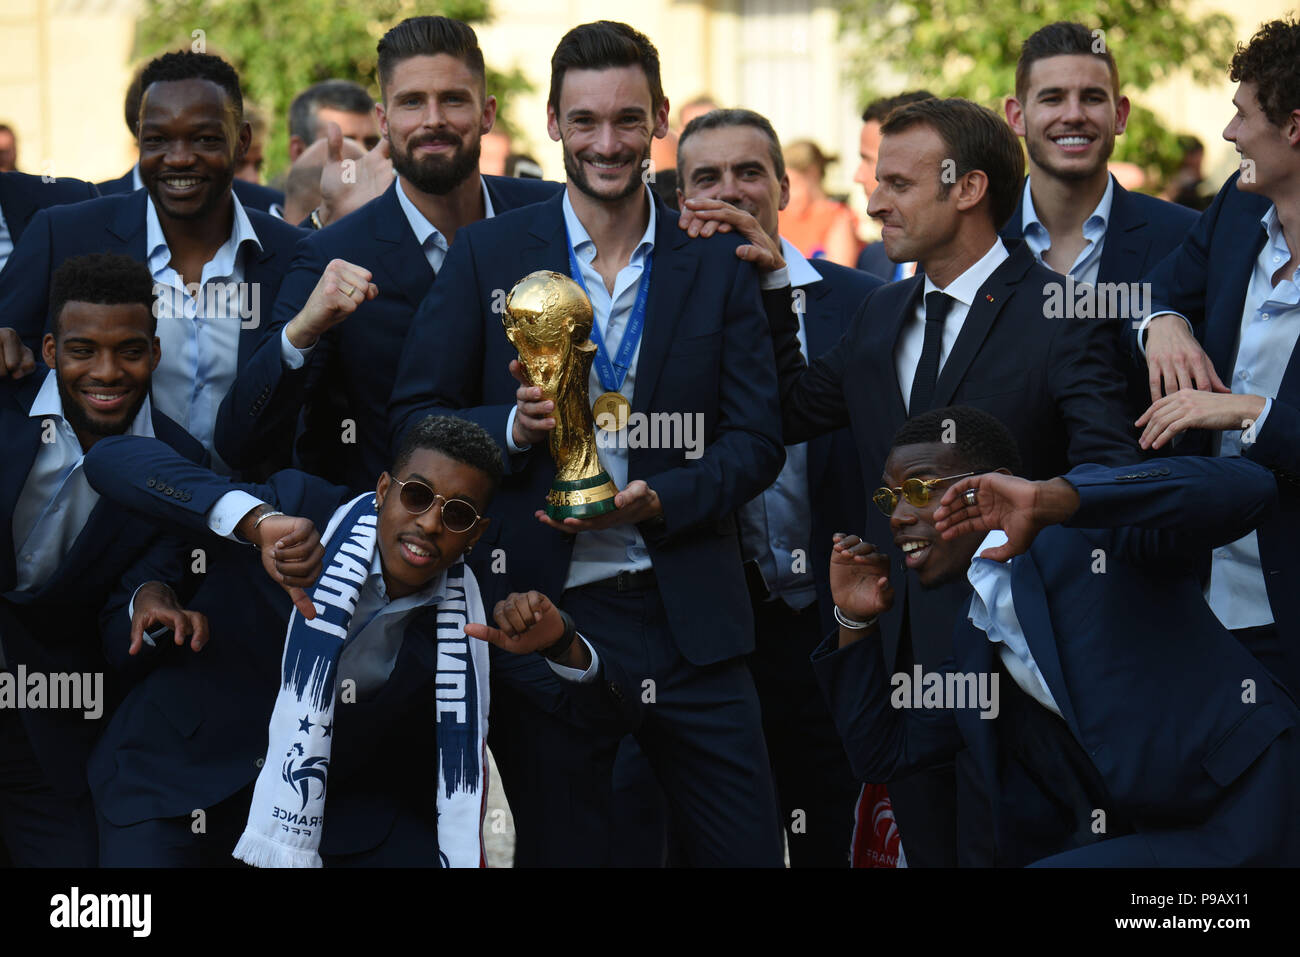 Paris, France. 16th July 2018. French President Emmanuel Macron welcomes the French football team at the presidential Elysee palace in the wake of France's World Cup victory. Le president francais Emmanuel Macron accueille les joueurs de l'equipe de France  au palais de l'Elysee apres leur victoire en Coupe du Monde. *** FRANCE OUT / NO SALES TO FRENCH MEDIA *** Credit: Idealink Photography/Alamy Live News Stock Photo